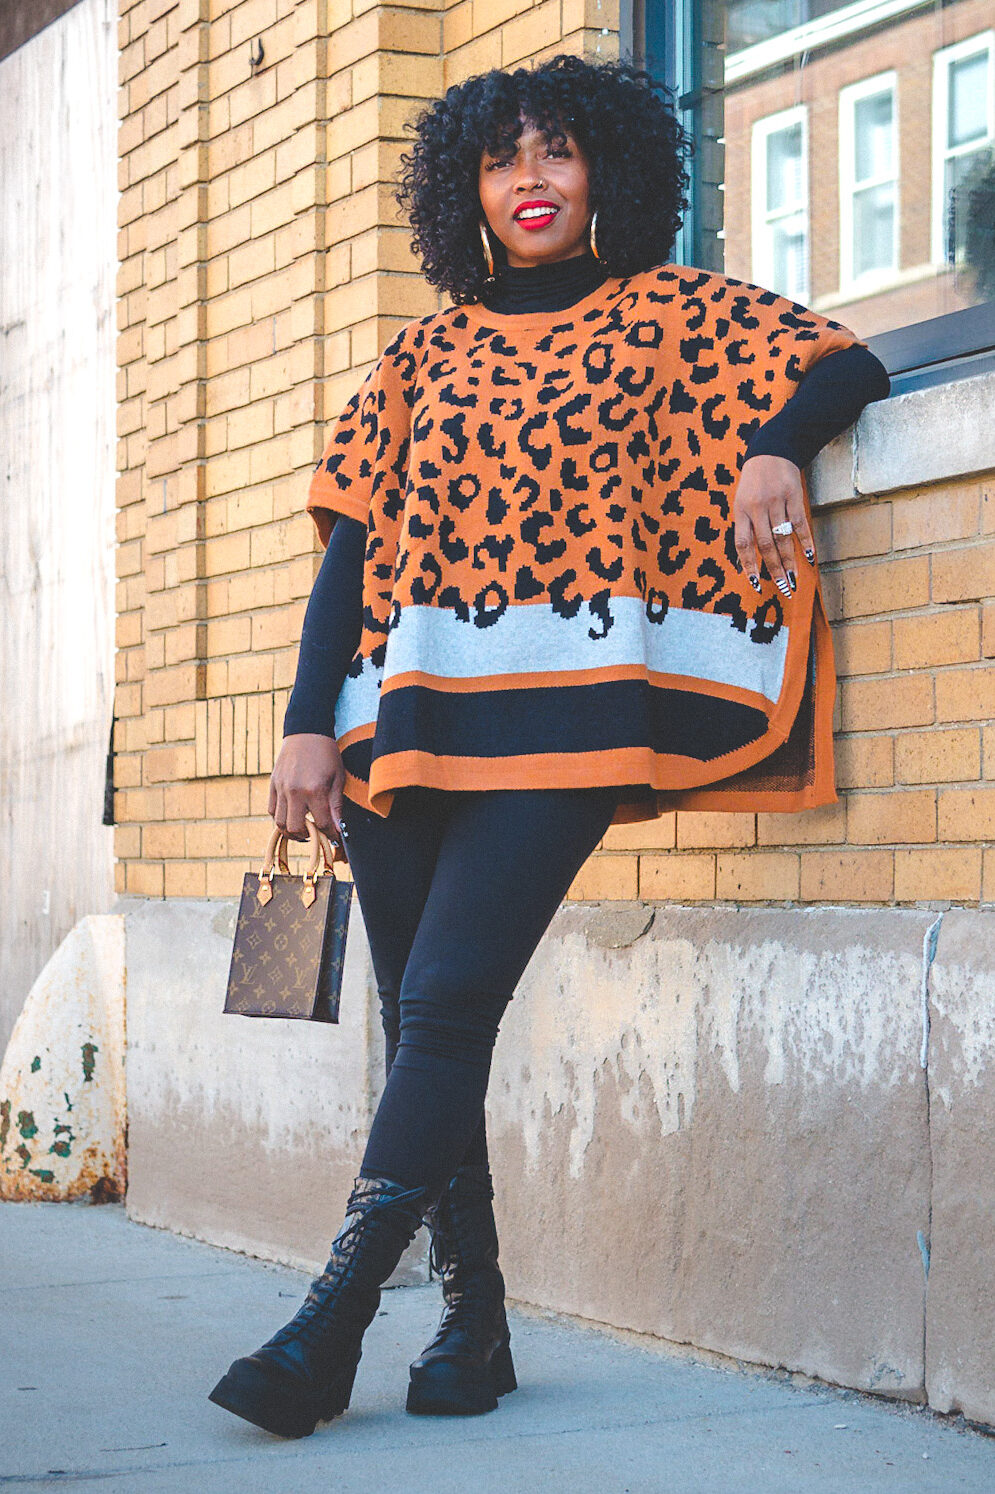 SWEENEE STYLE, INDIANAPOLIS FASHION BLOG, HOW TO WEAR LEOPARD, HOW TO WEAR LEGGINGS, BLACK GIRLS WHO BLOG, HOW TO WEAR BLACK LEGGINGS, NATURAL HAIR, HOW TO WEAR A WASH AND GO